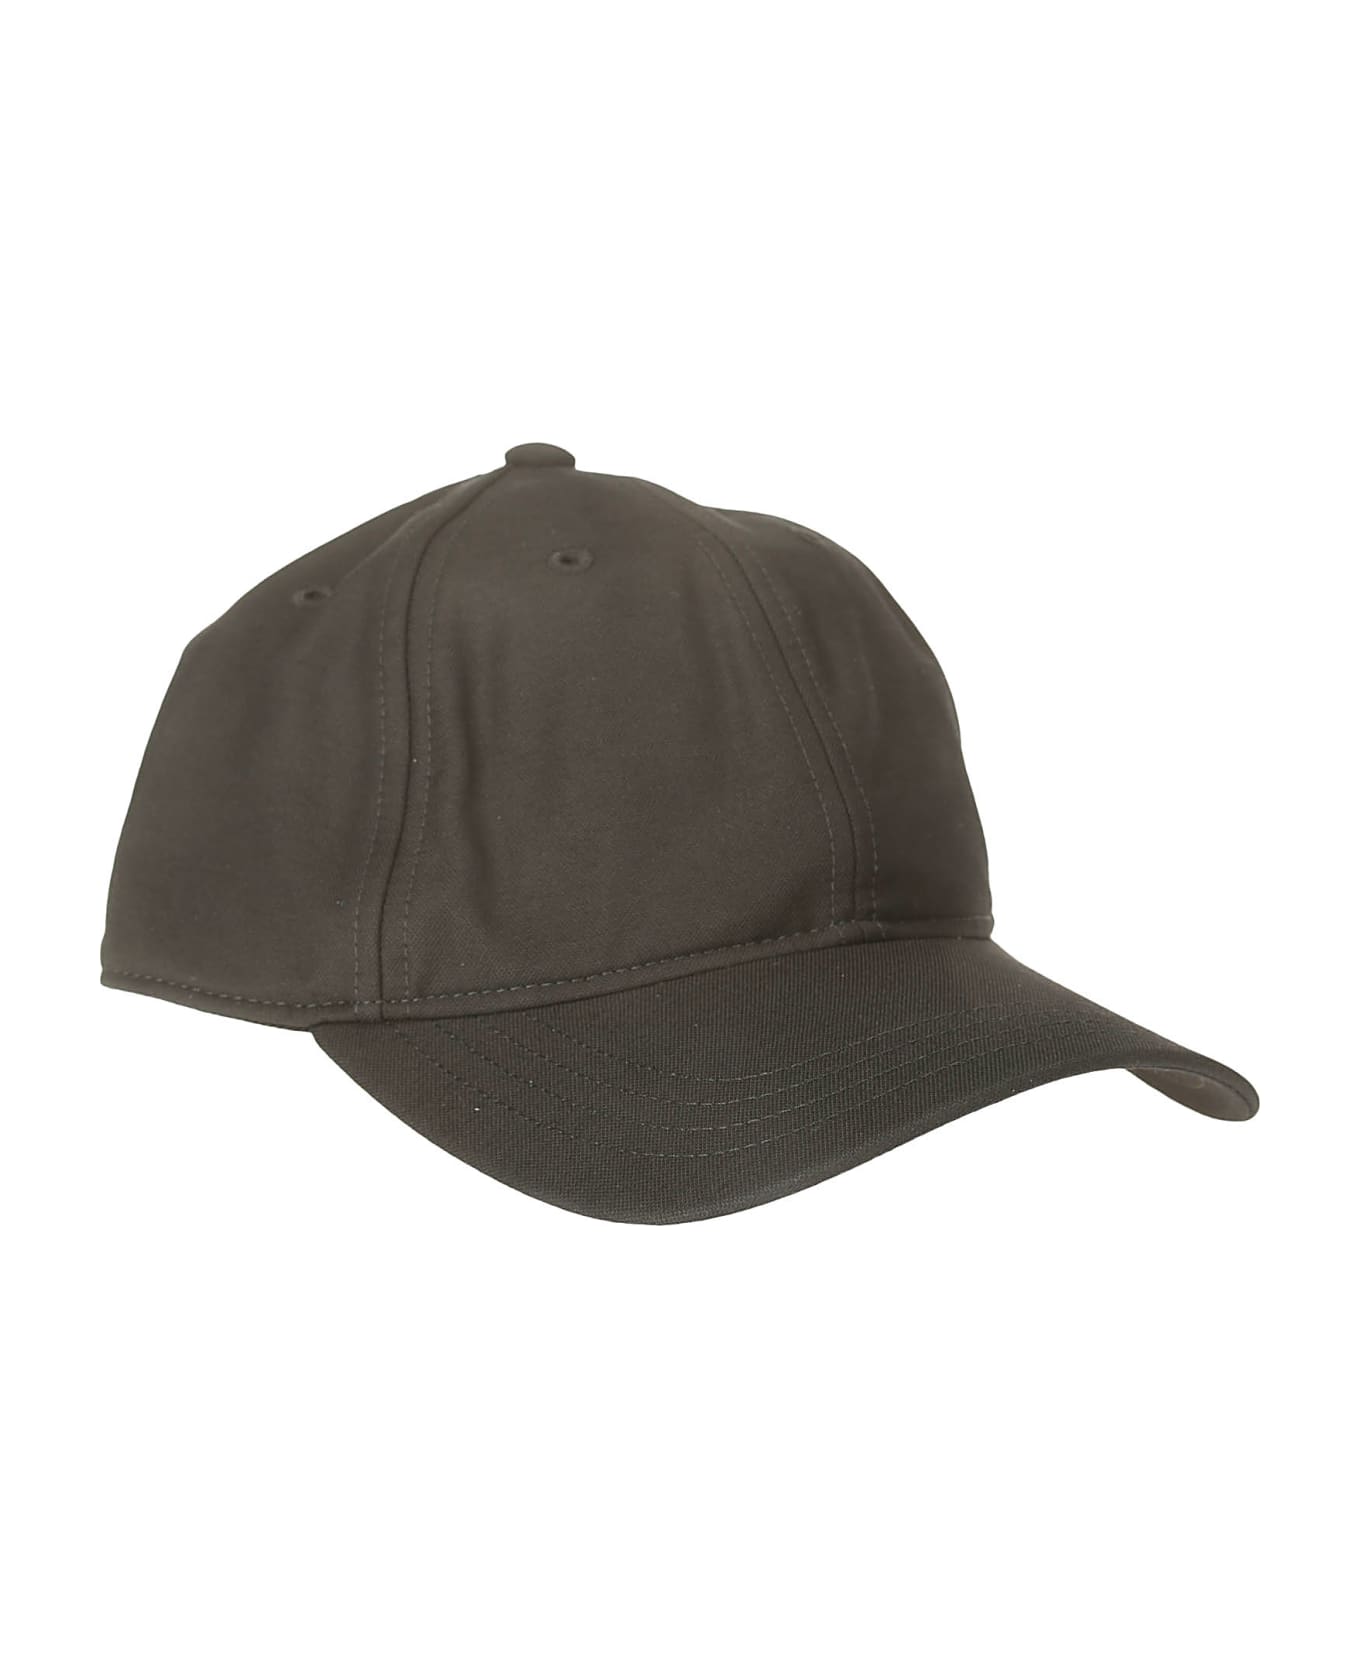 Our Legacy Ballcap - DELUXE BLACK EXQUISITE